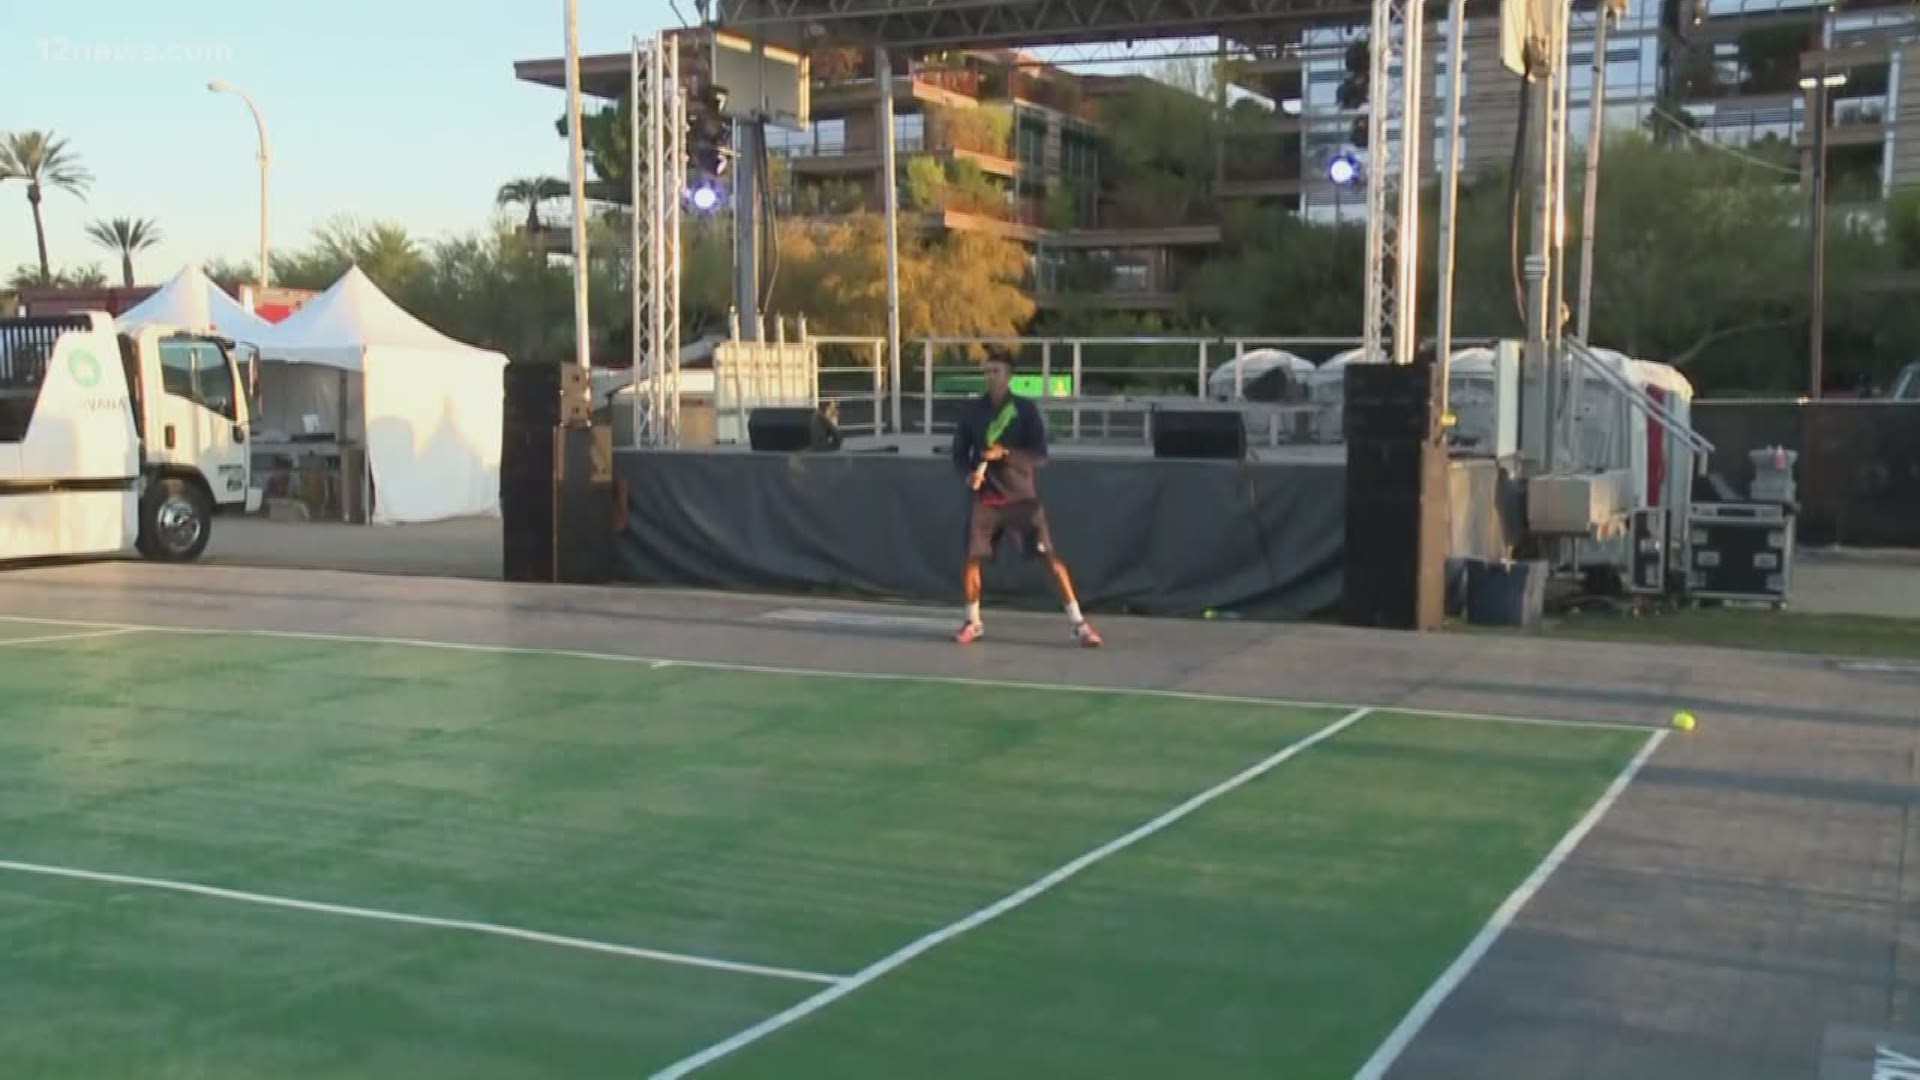 Trisha Hendricks gives us the rundown on what's coming up for Scottsdale Tennis Week.